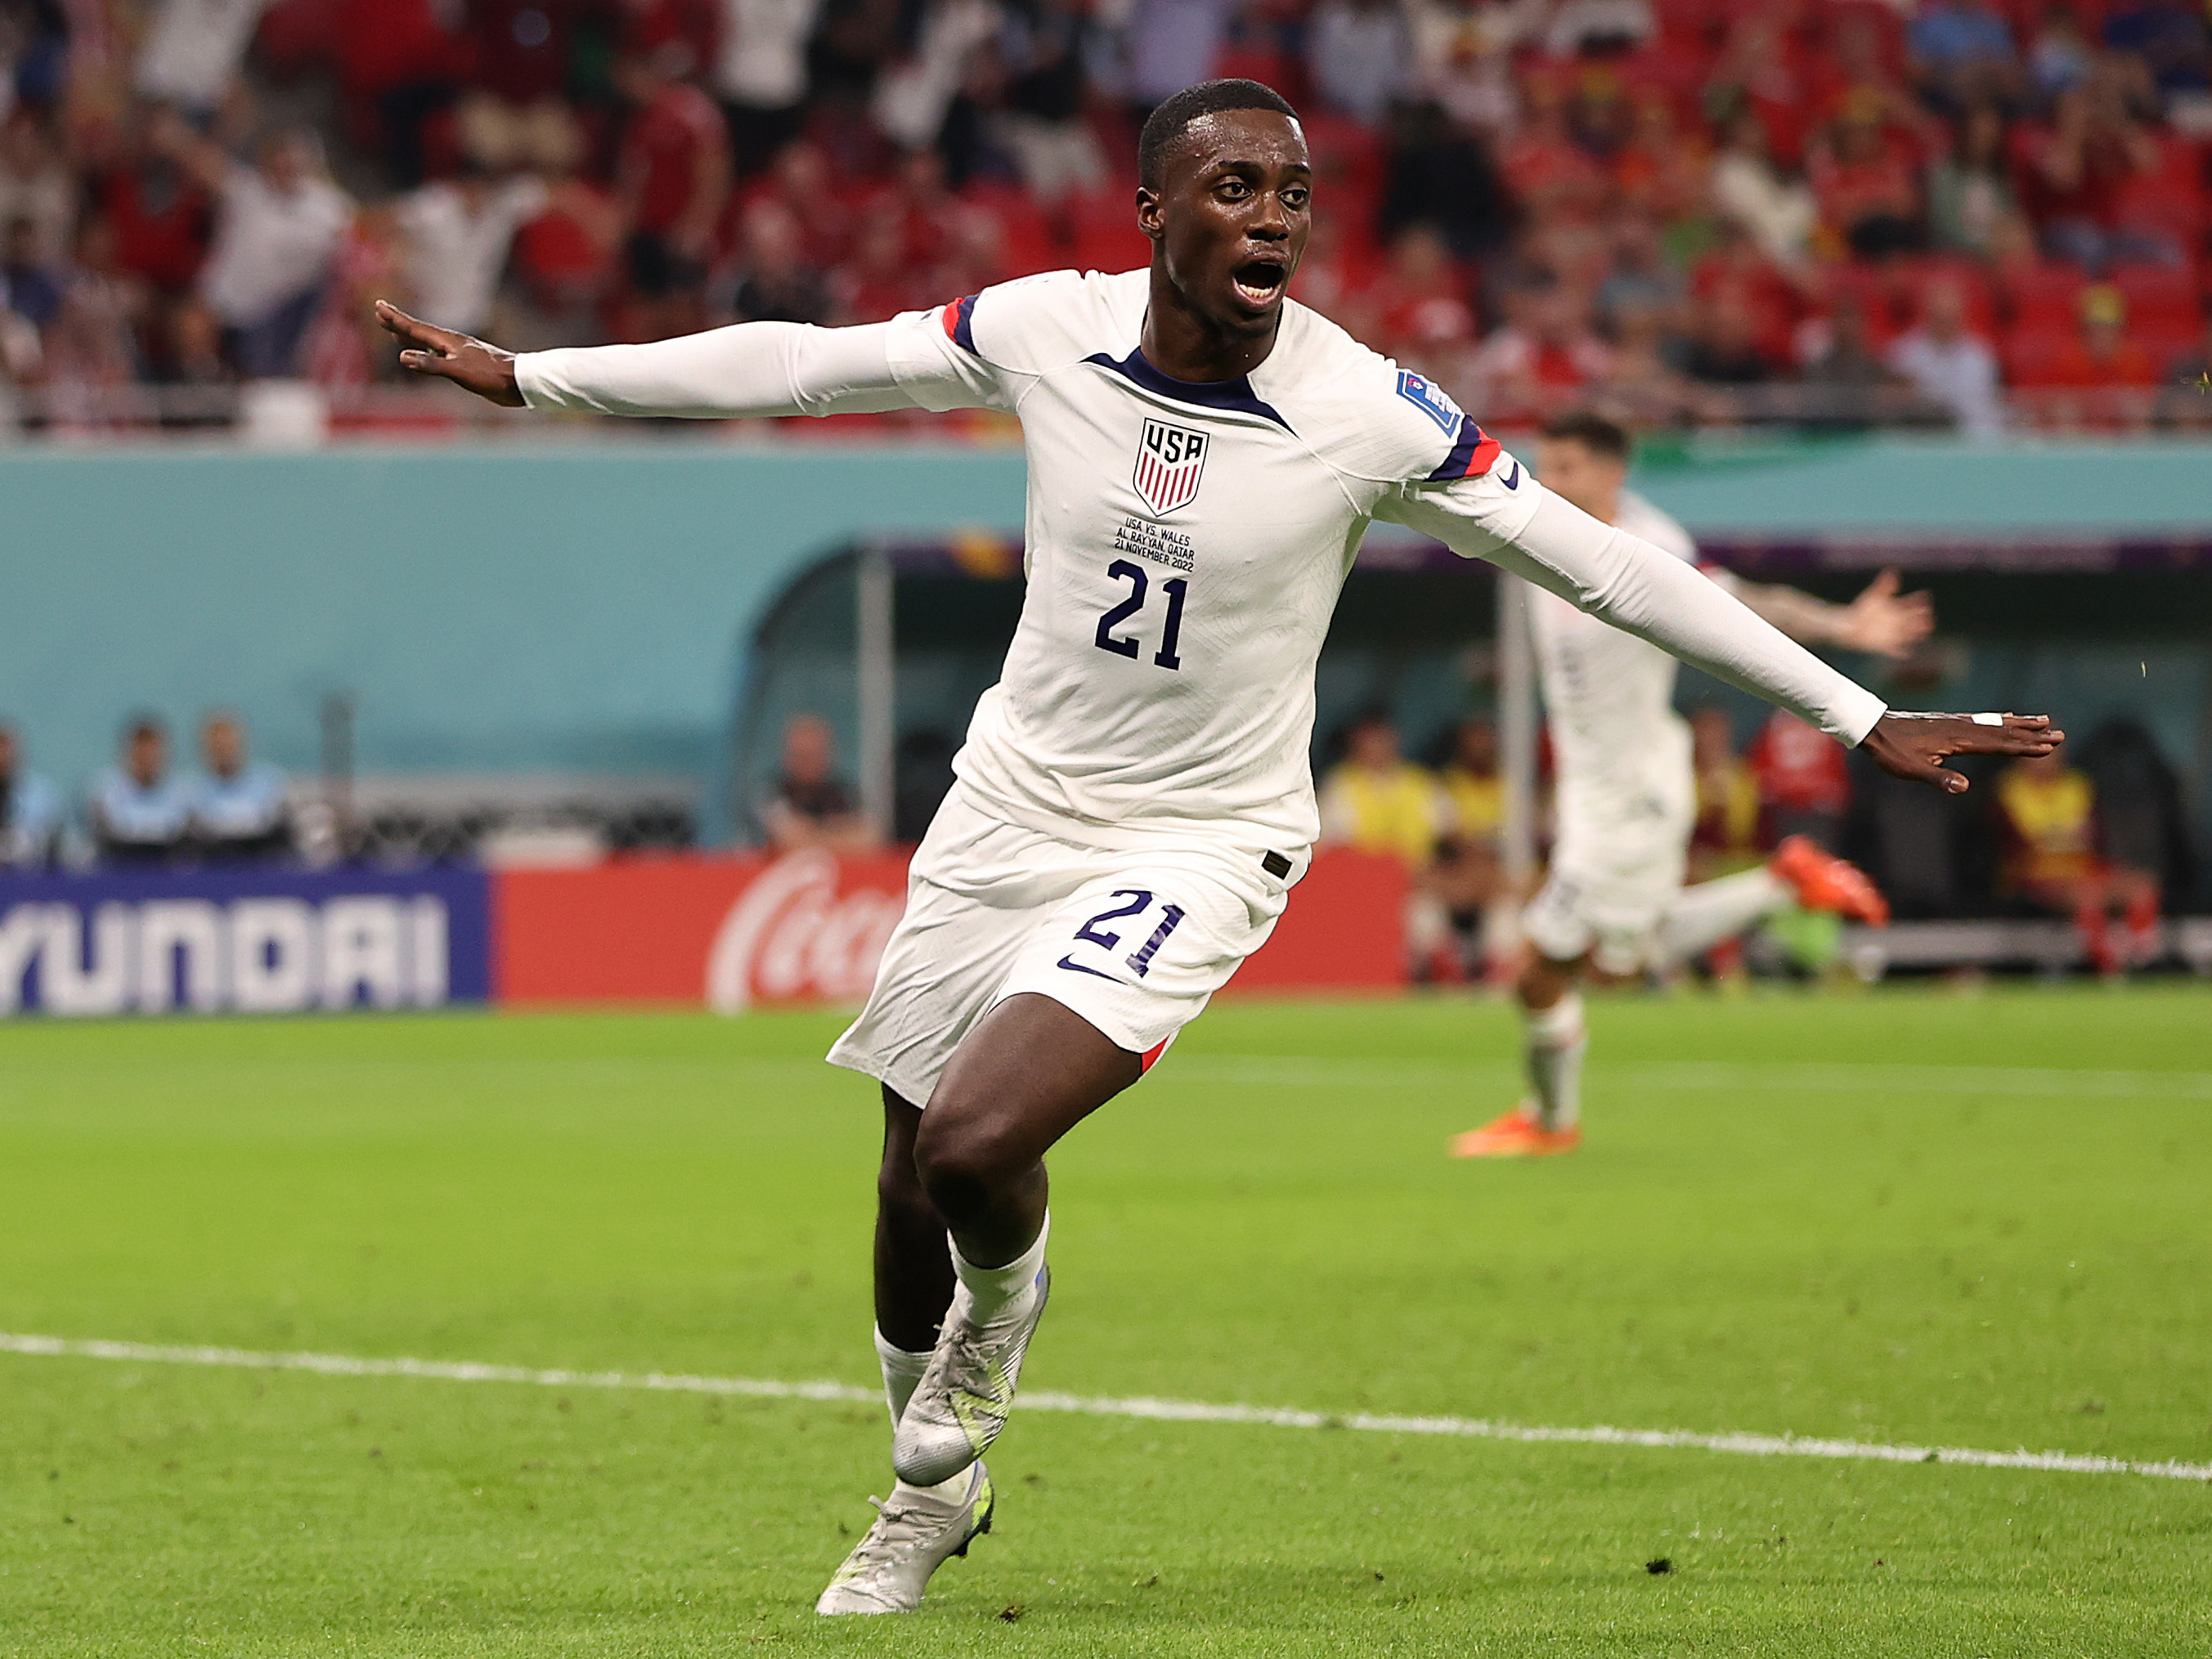 For Tim Weah, a World Cup goal capped a family journey